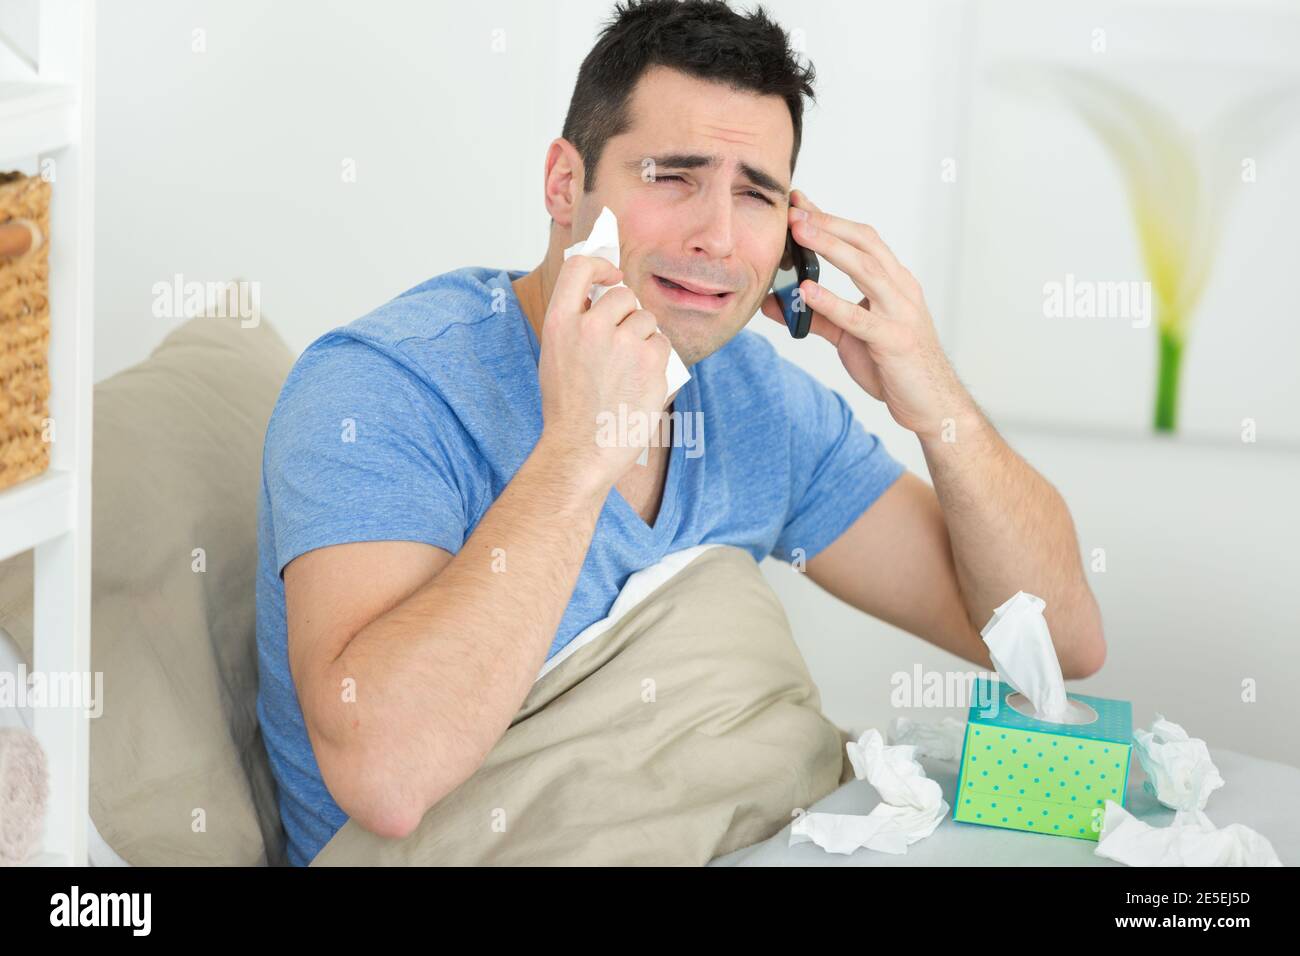 young desperate man lying on bed alone sad Stock Photo